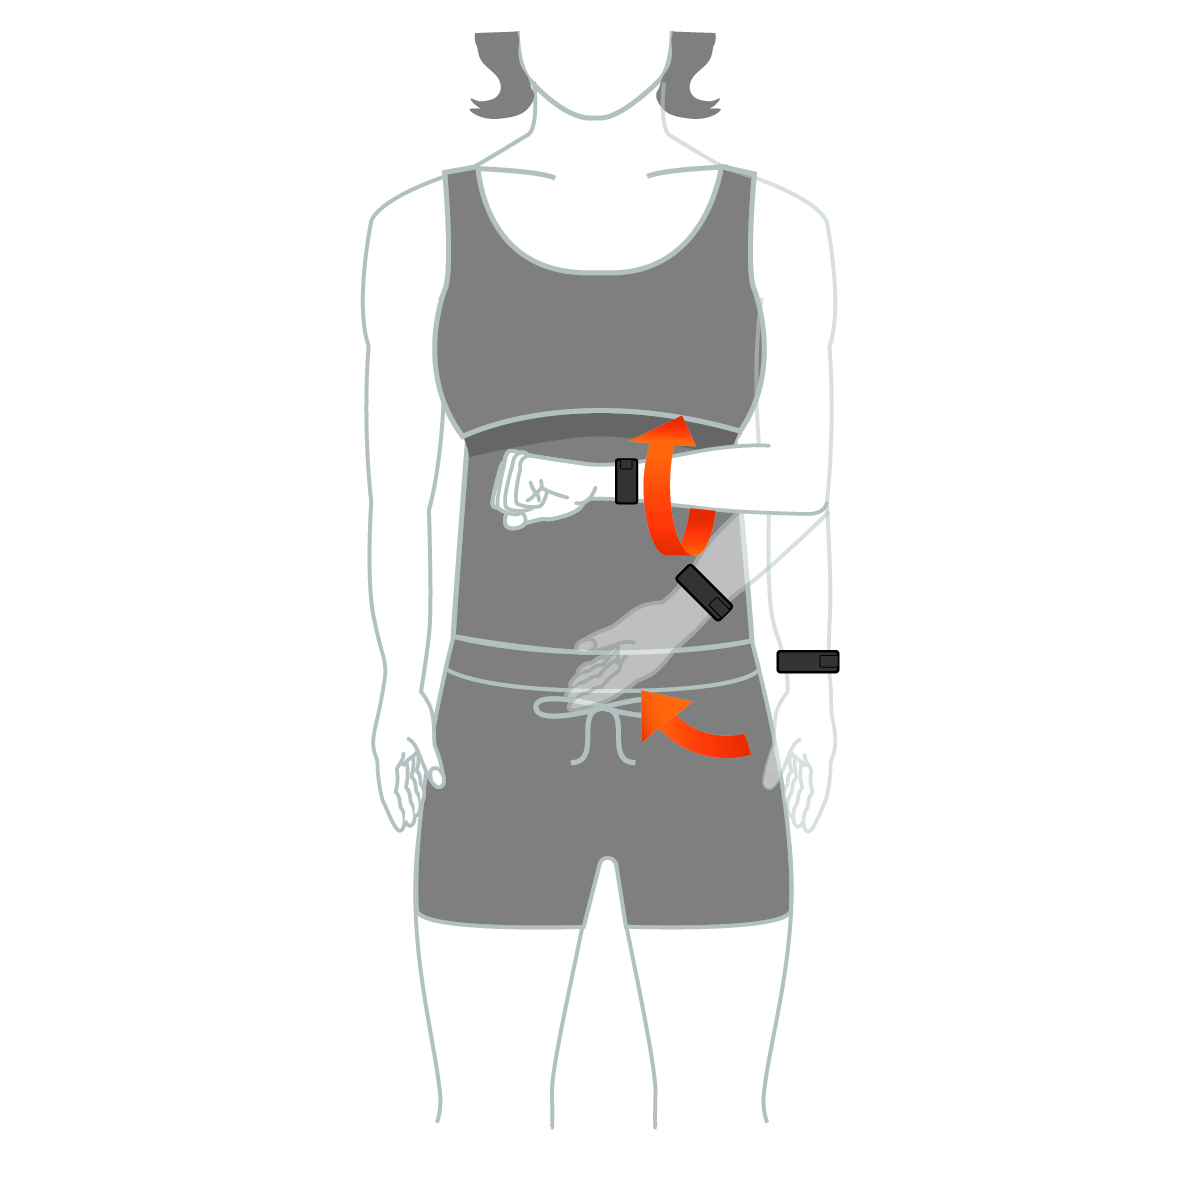 Diagram of arm and wrist movement to turn on watch screen